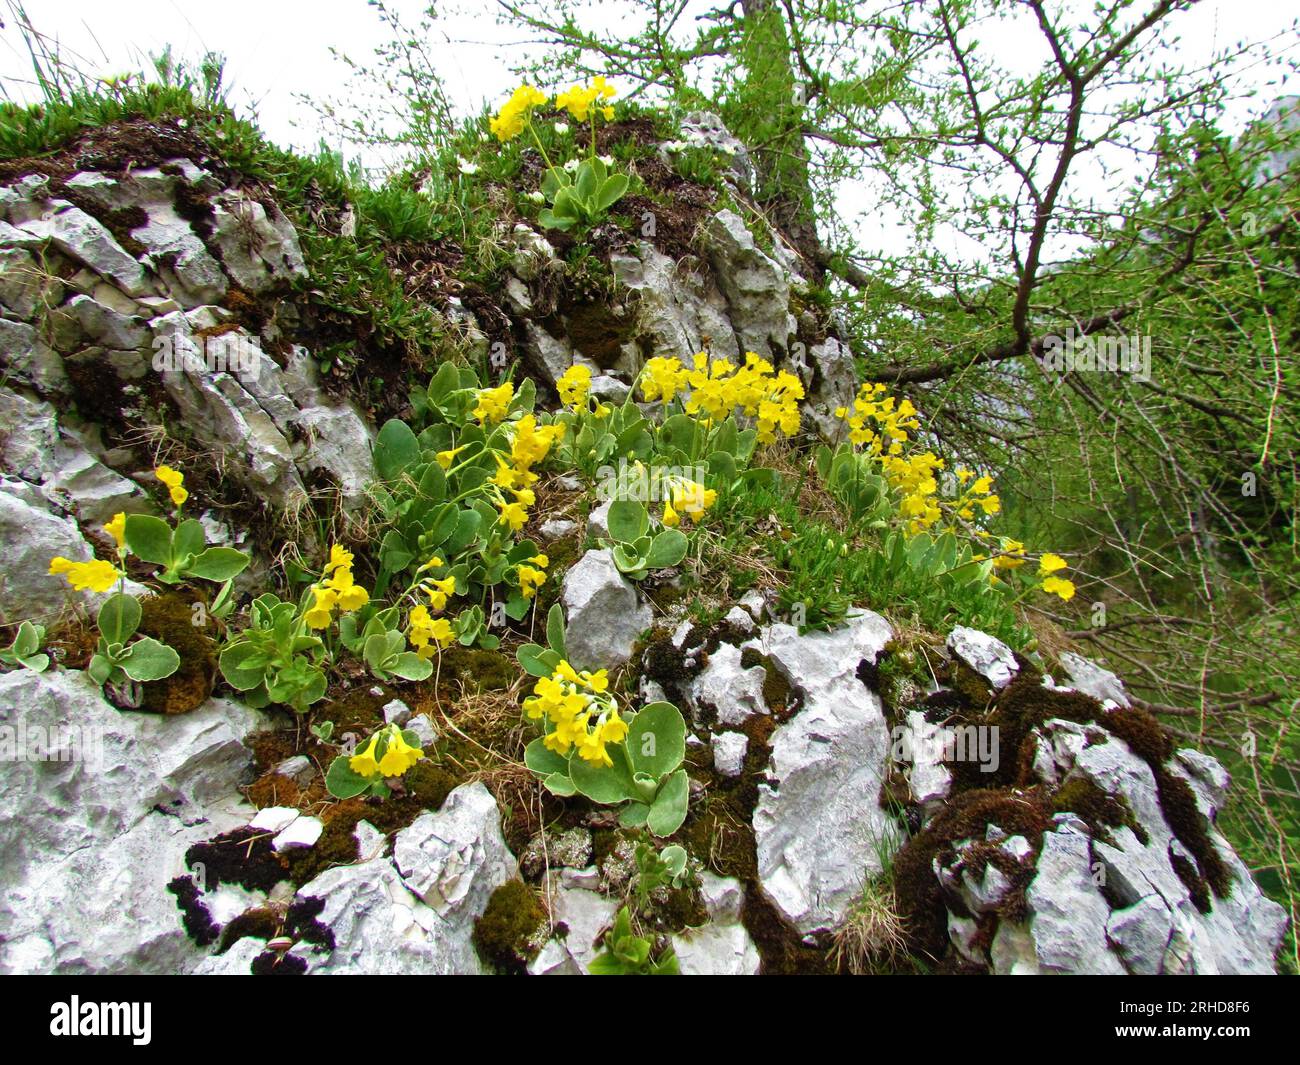 Rock covered in yellow blooming auricula (Primula auricula) flowers Stock Photo